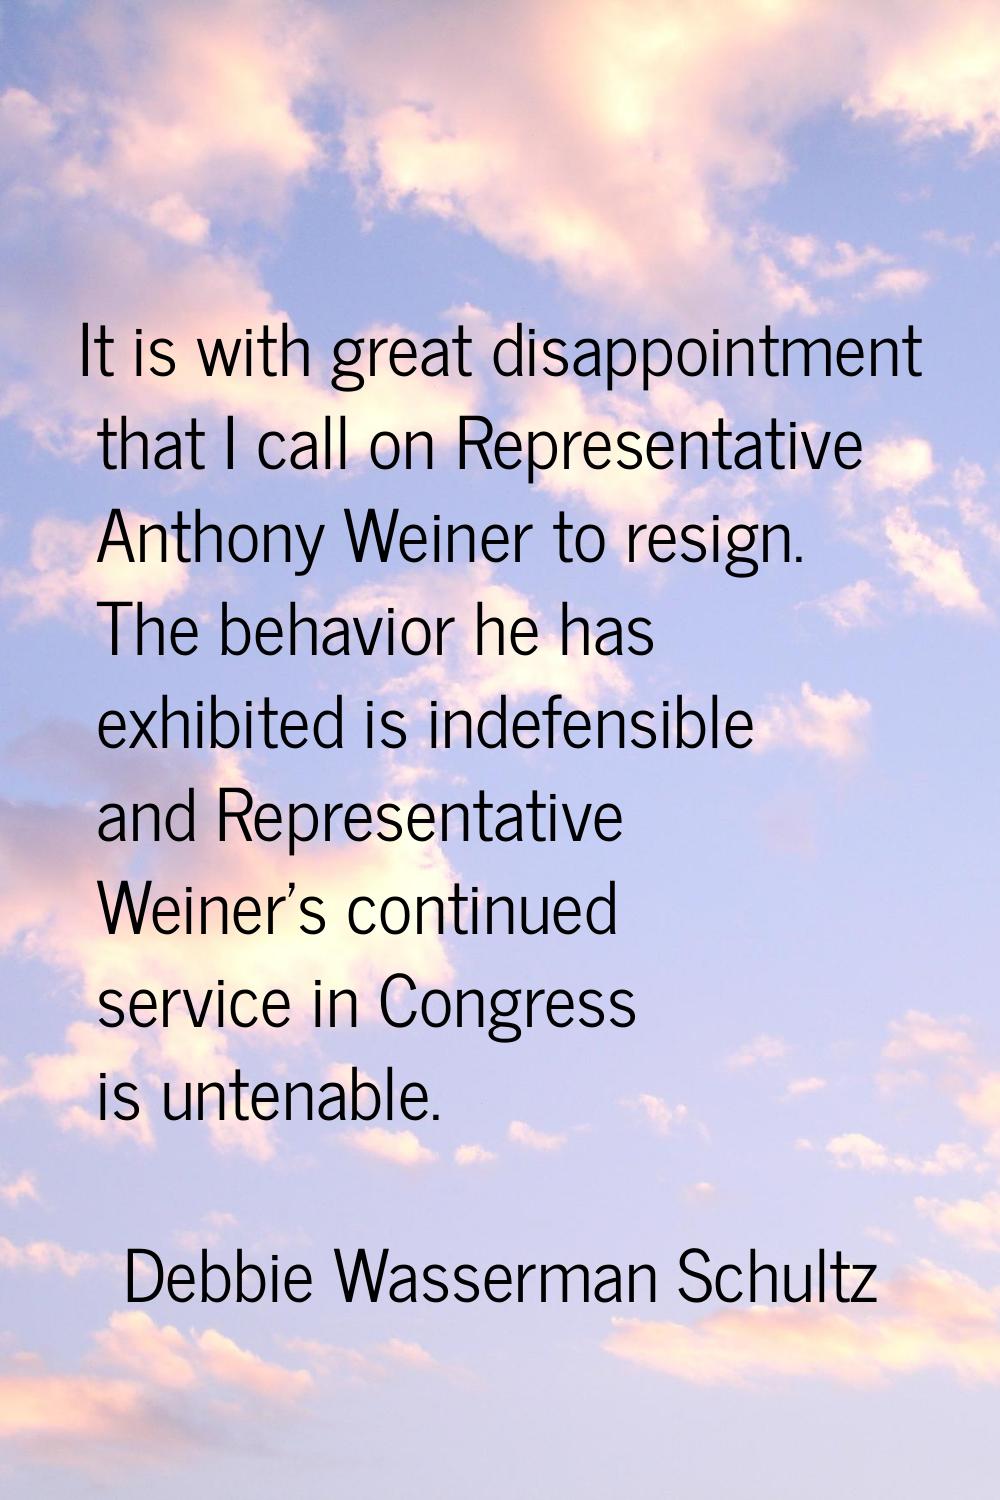 It is with great disappointment that I call on Representative Anthony Weiner to resign. The behavio